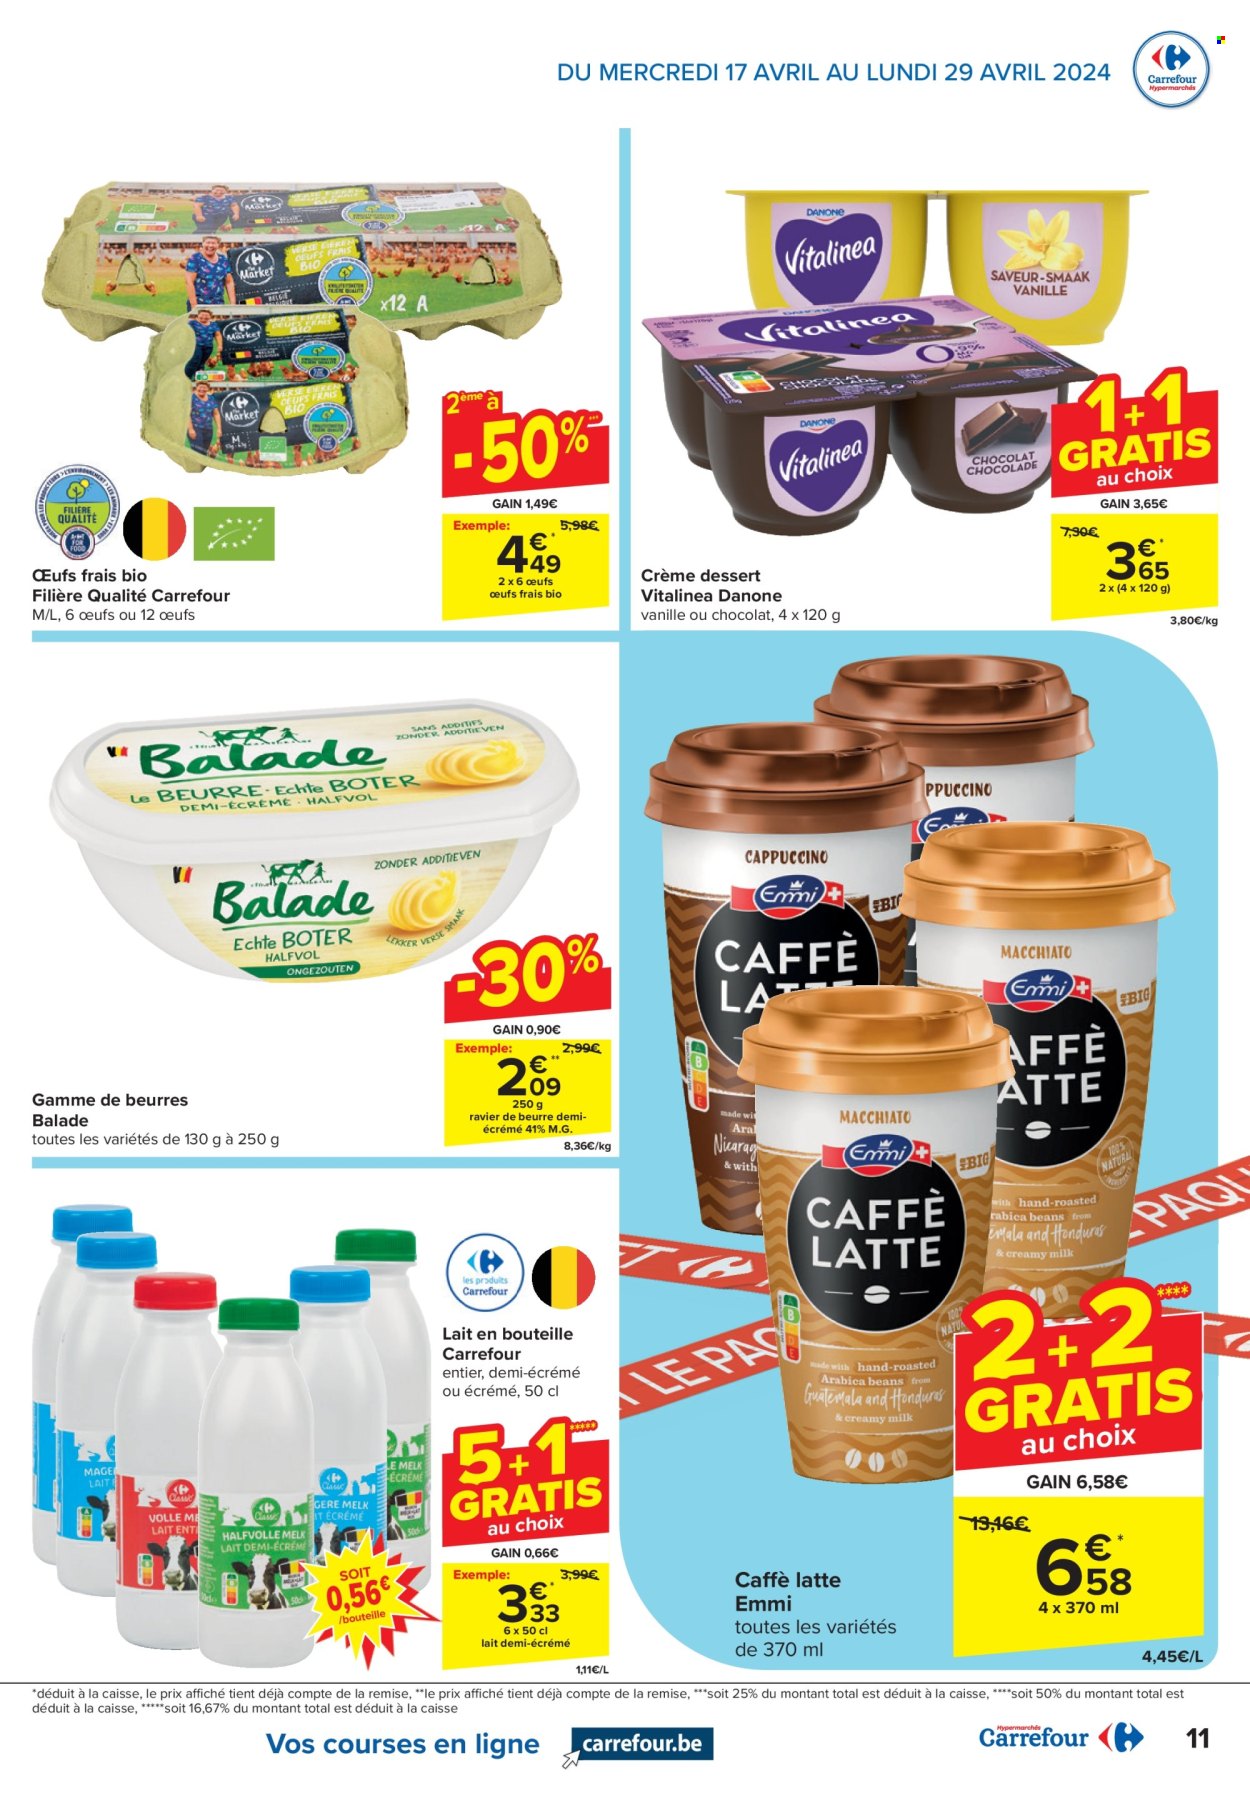 Catalogue Carrefour hypermarkt - 17.4.2024 - 29.4.2024. Page 11.